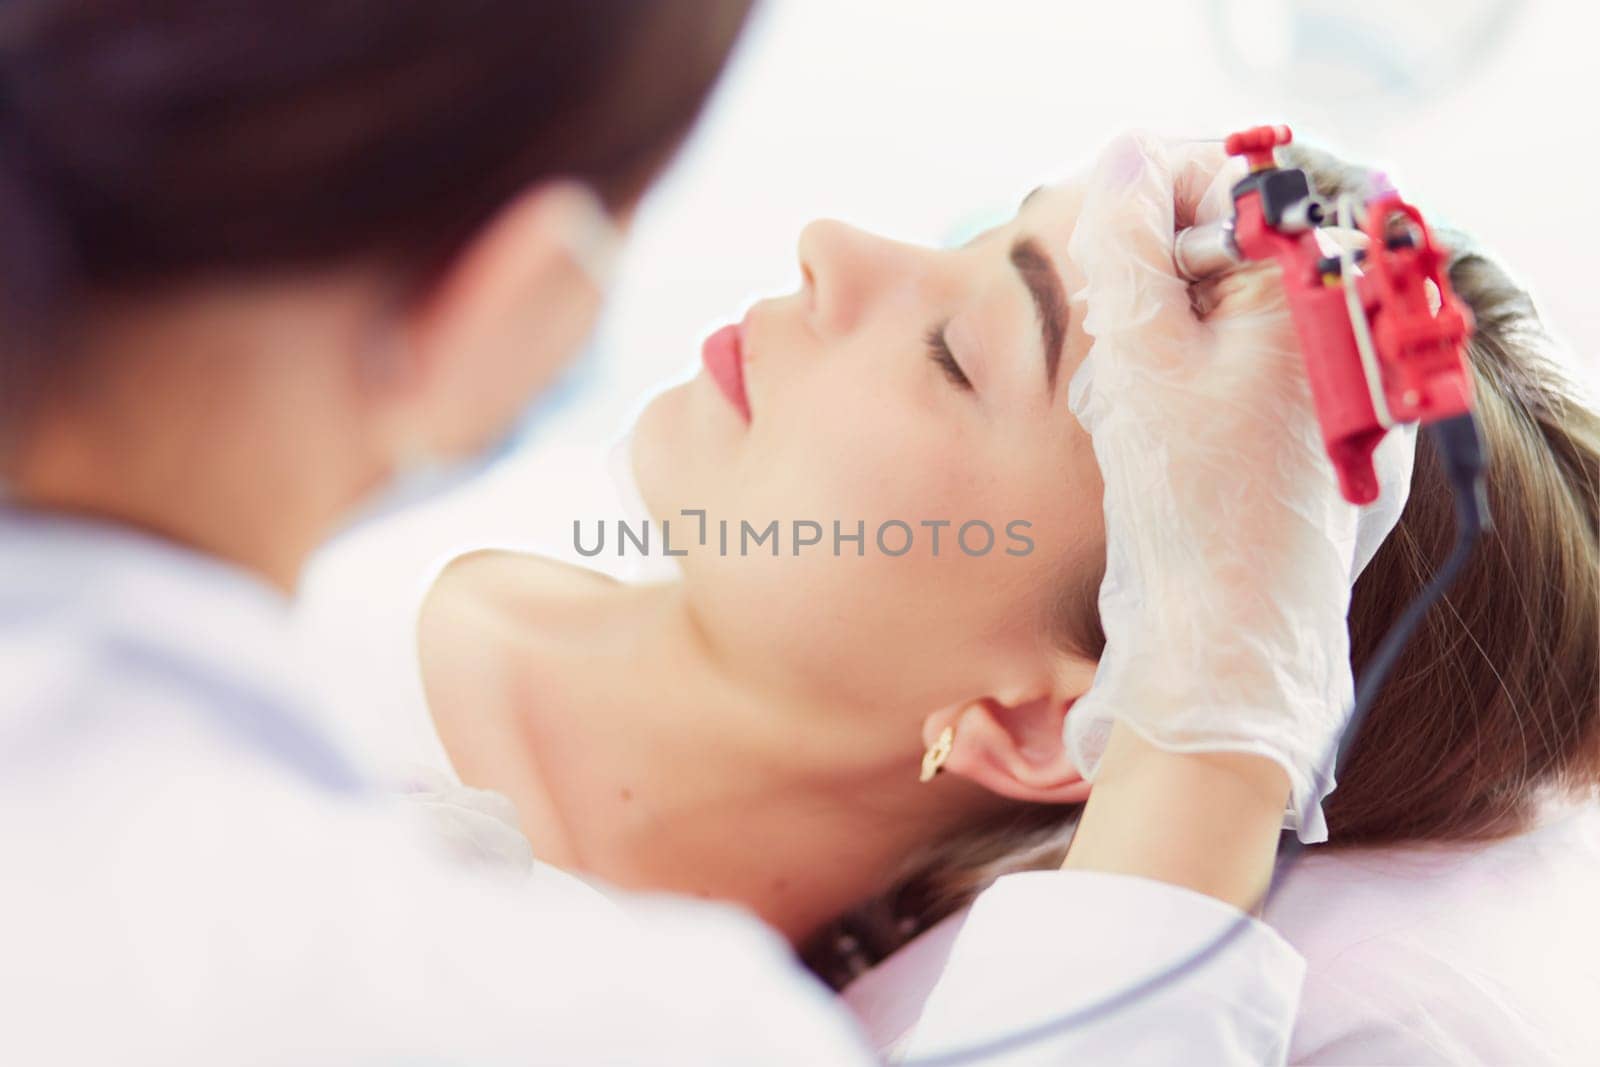 A young girl having red lips permanent makeup, micropigmentation.